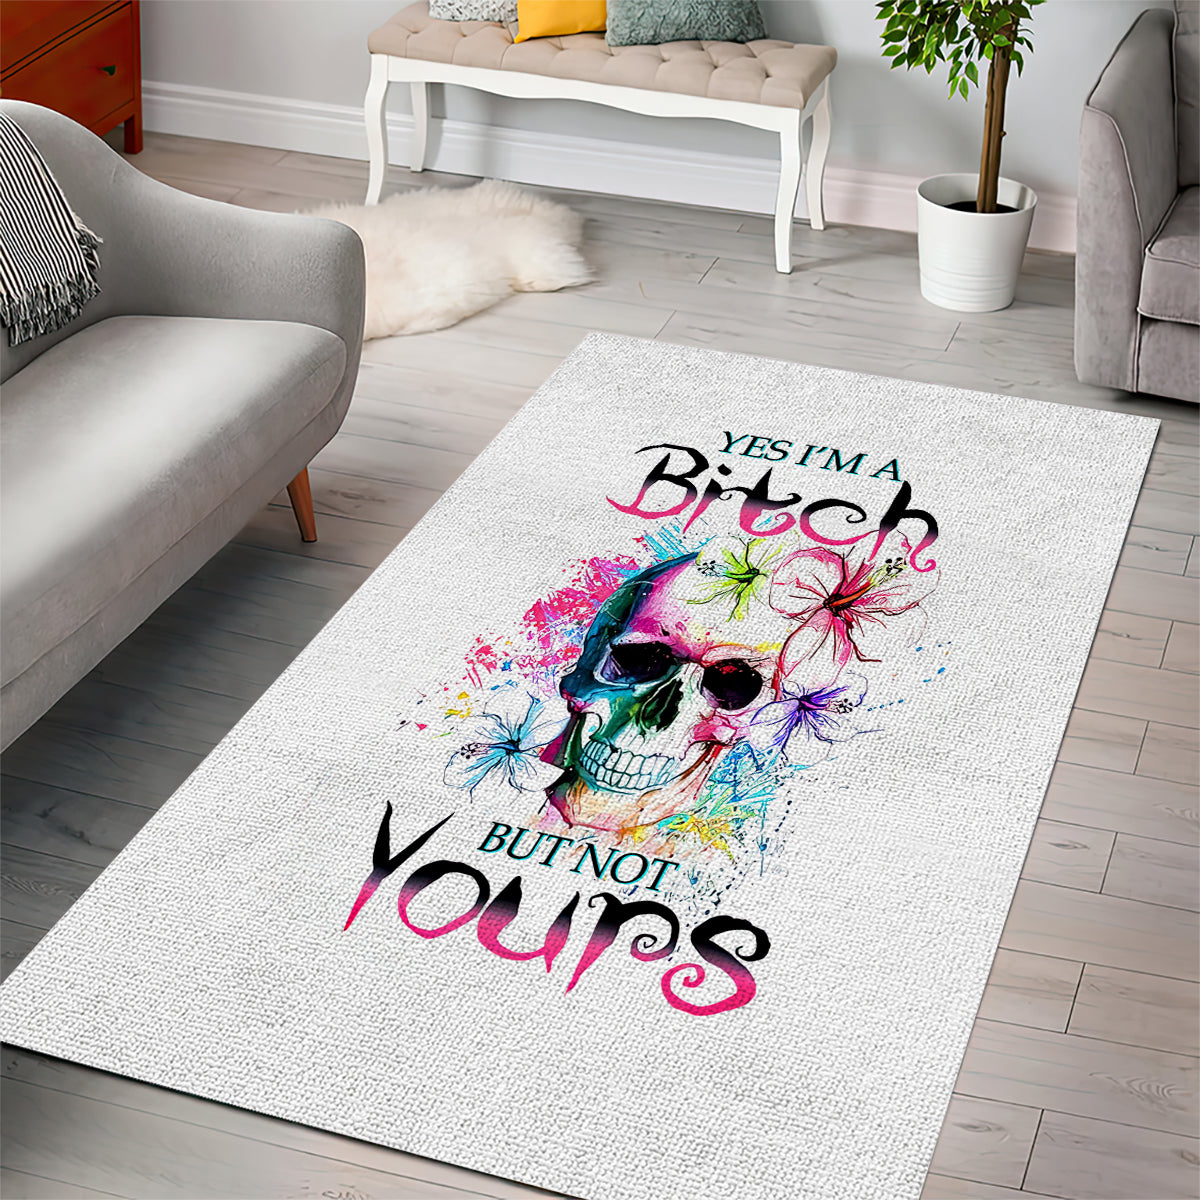 watercolor-skull-area-rug-yes-im-bitch-but-not-your